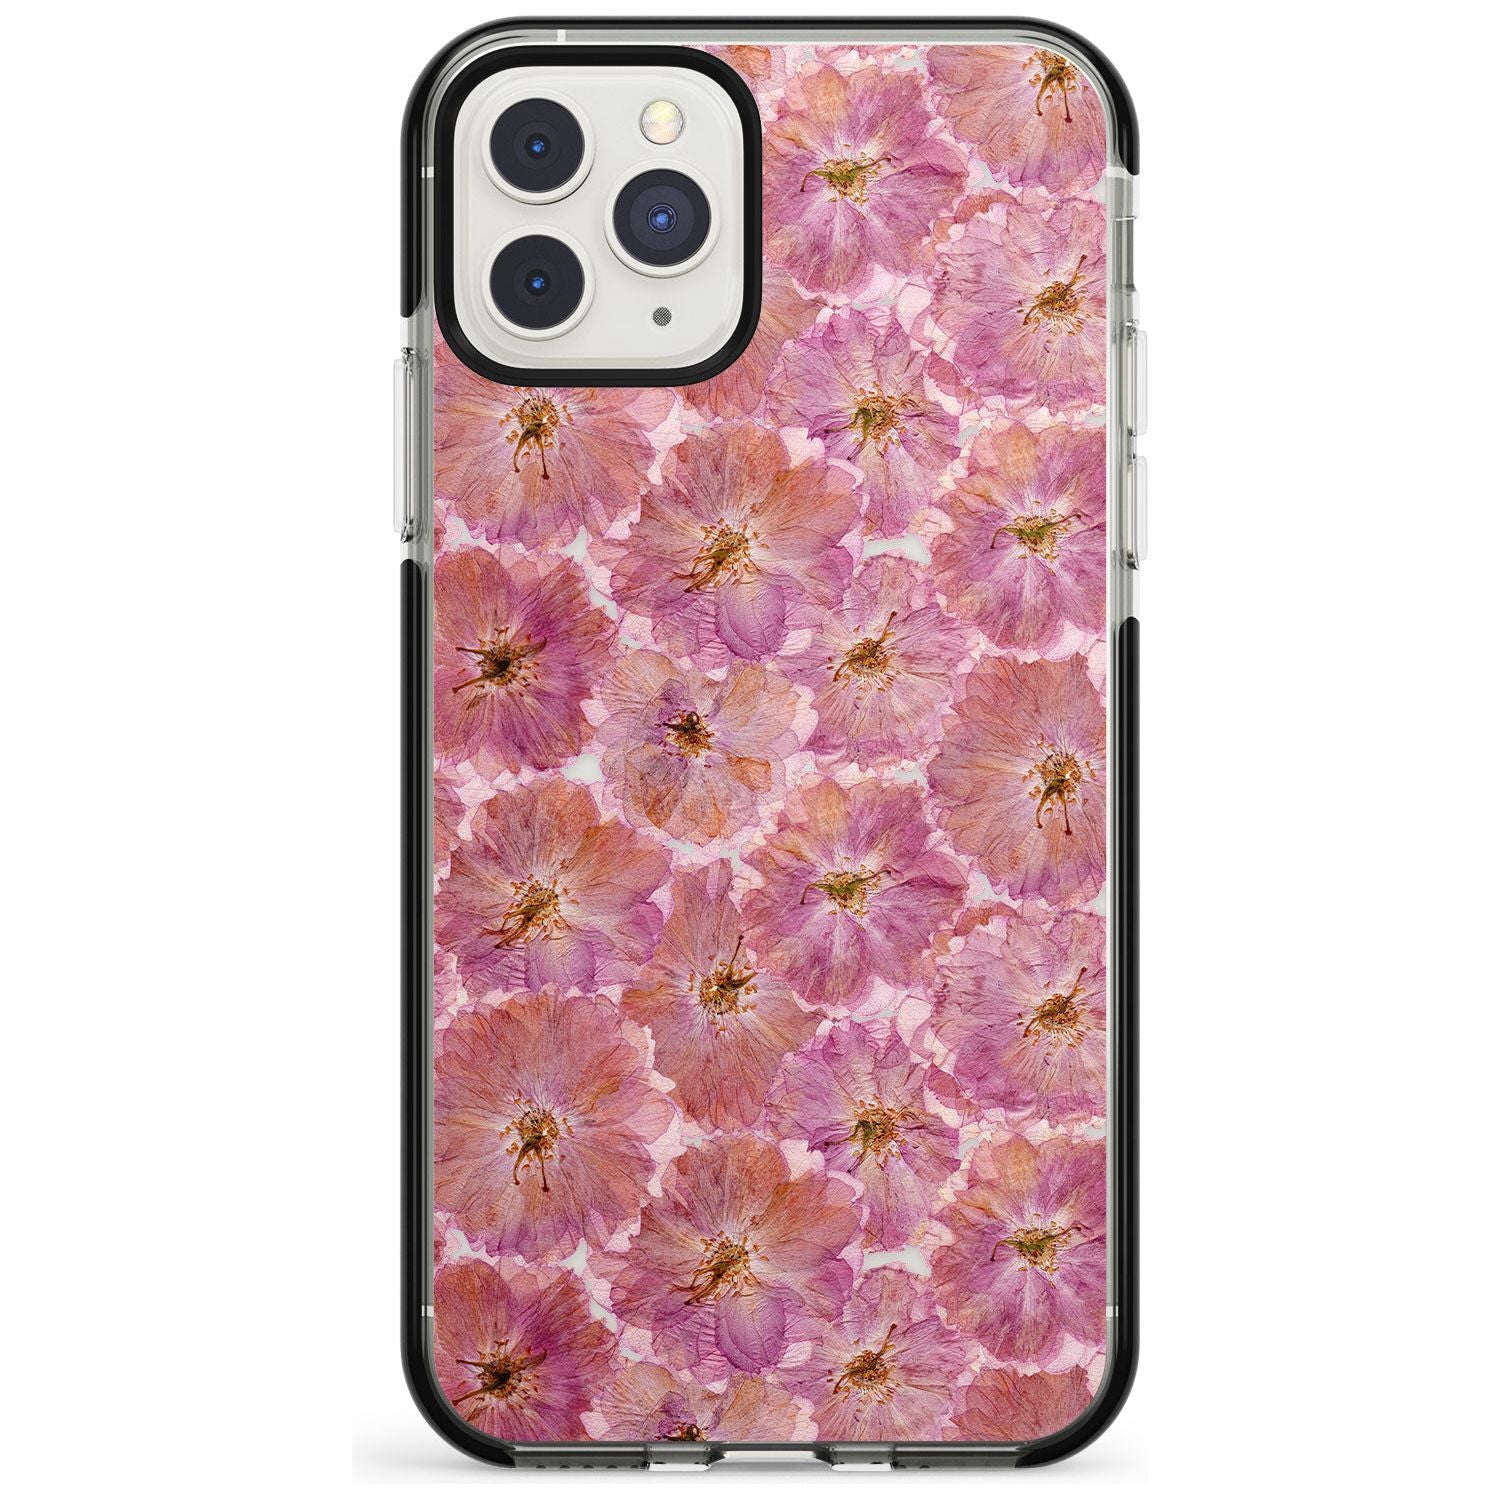 Large Pink Flowers Transparent Design Black Impact Phone Case for iPhone 11 Pro Max